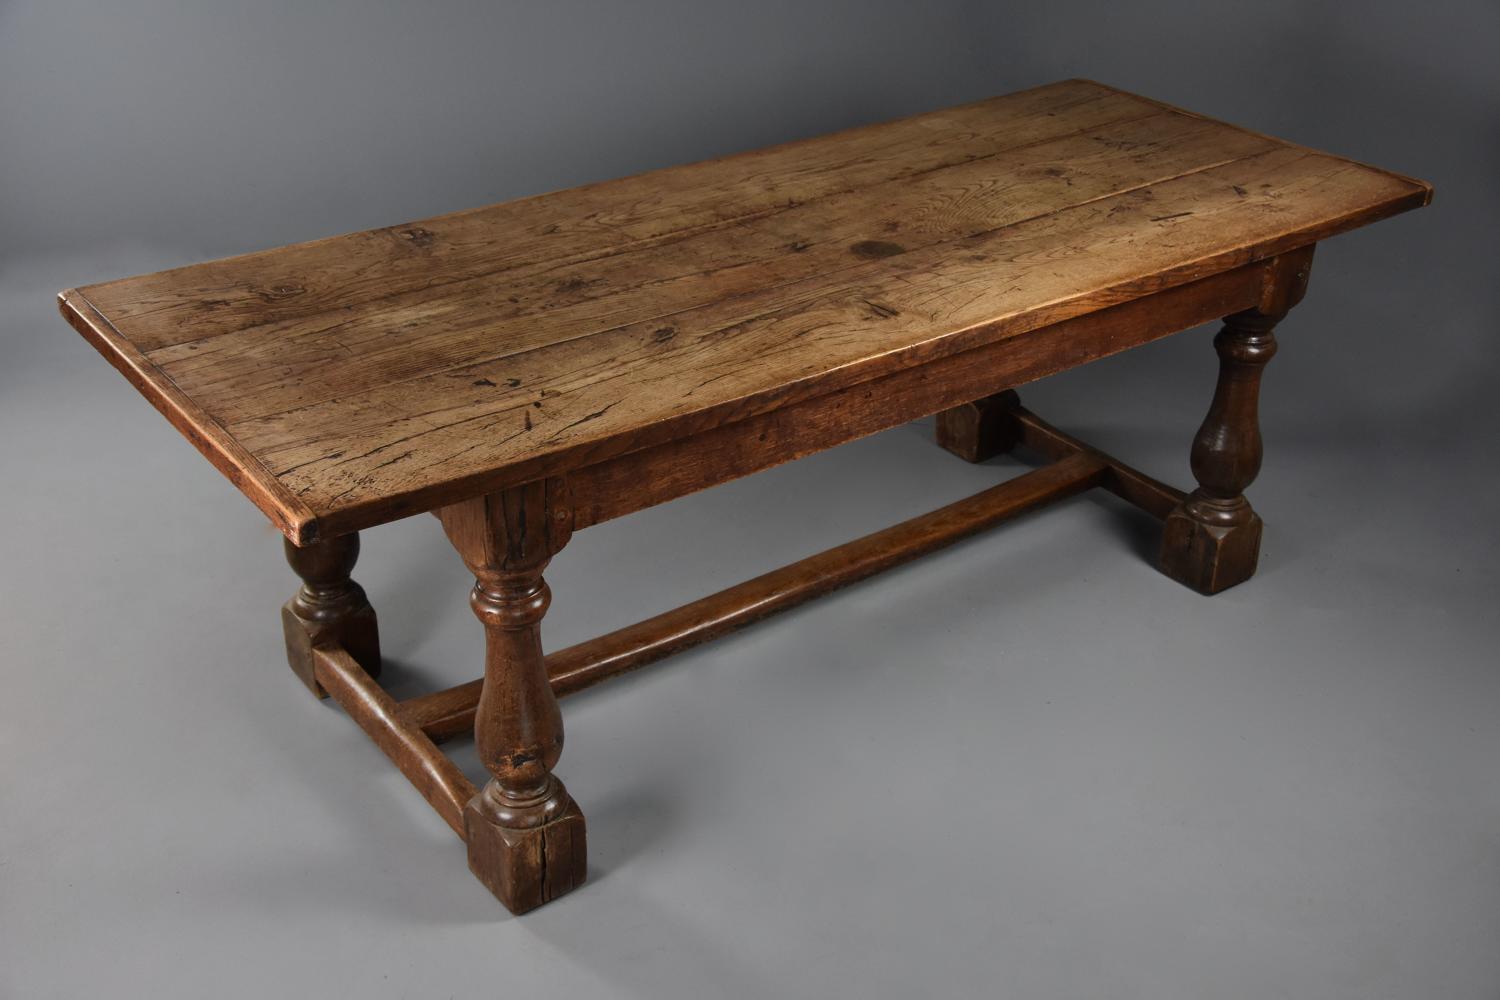 19th century Arts & Crafts oak refectory table with fine faded patina